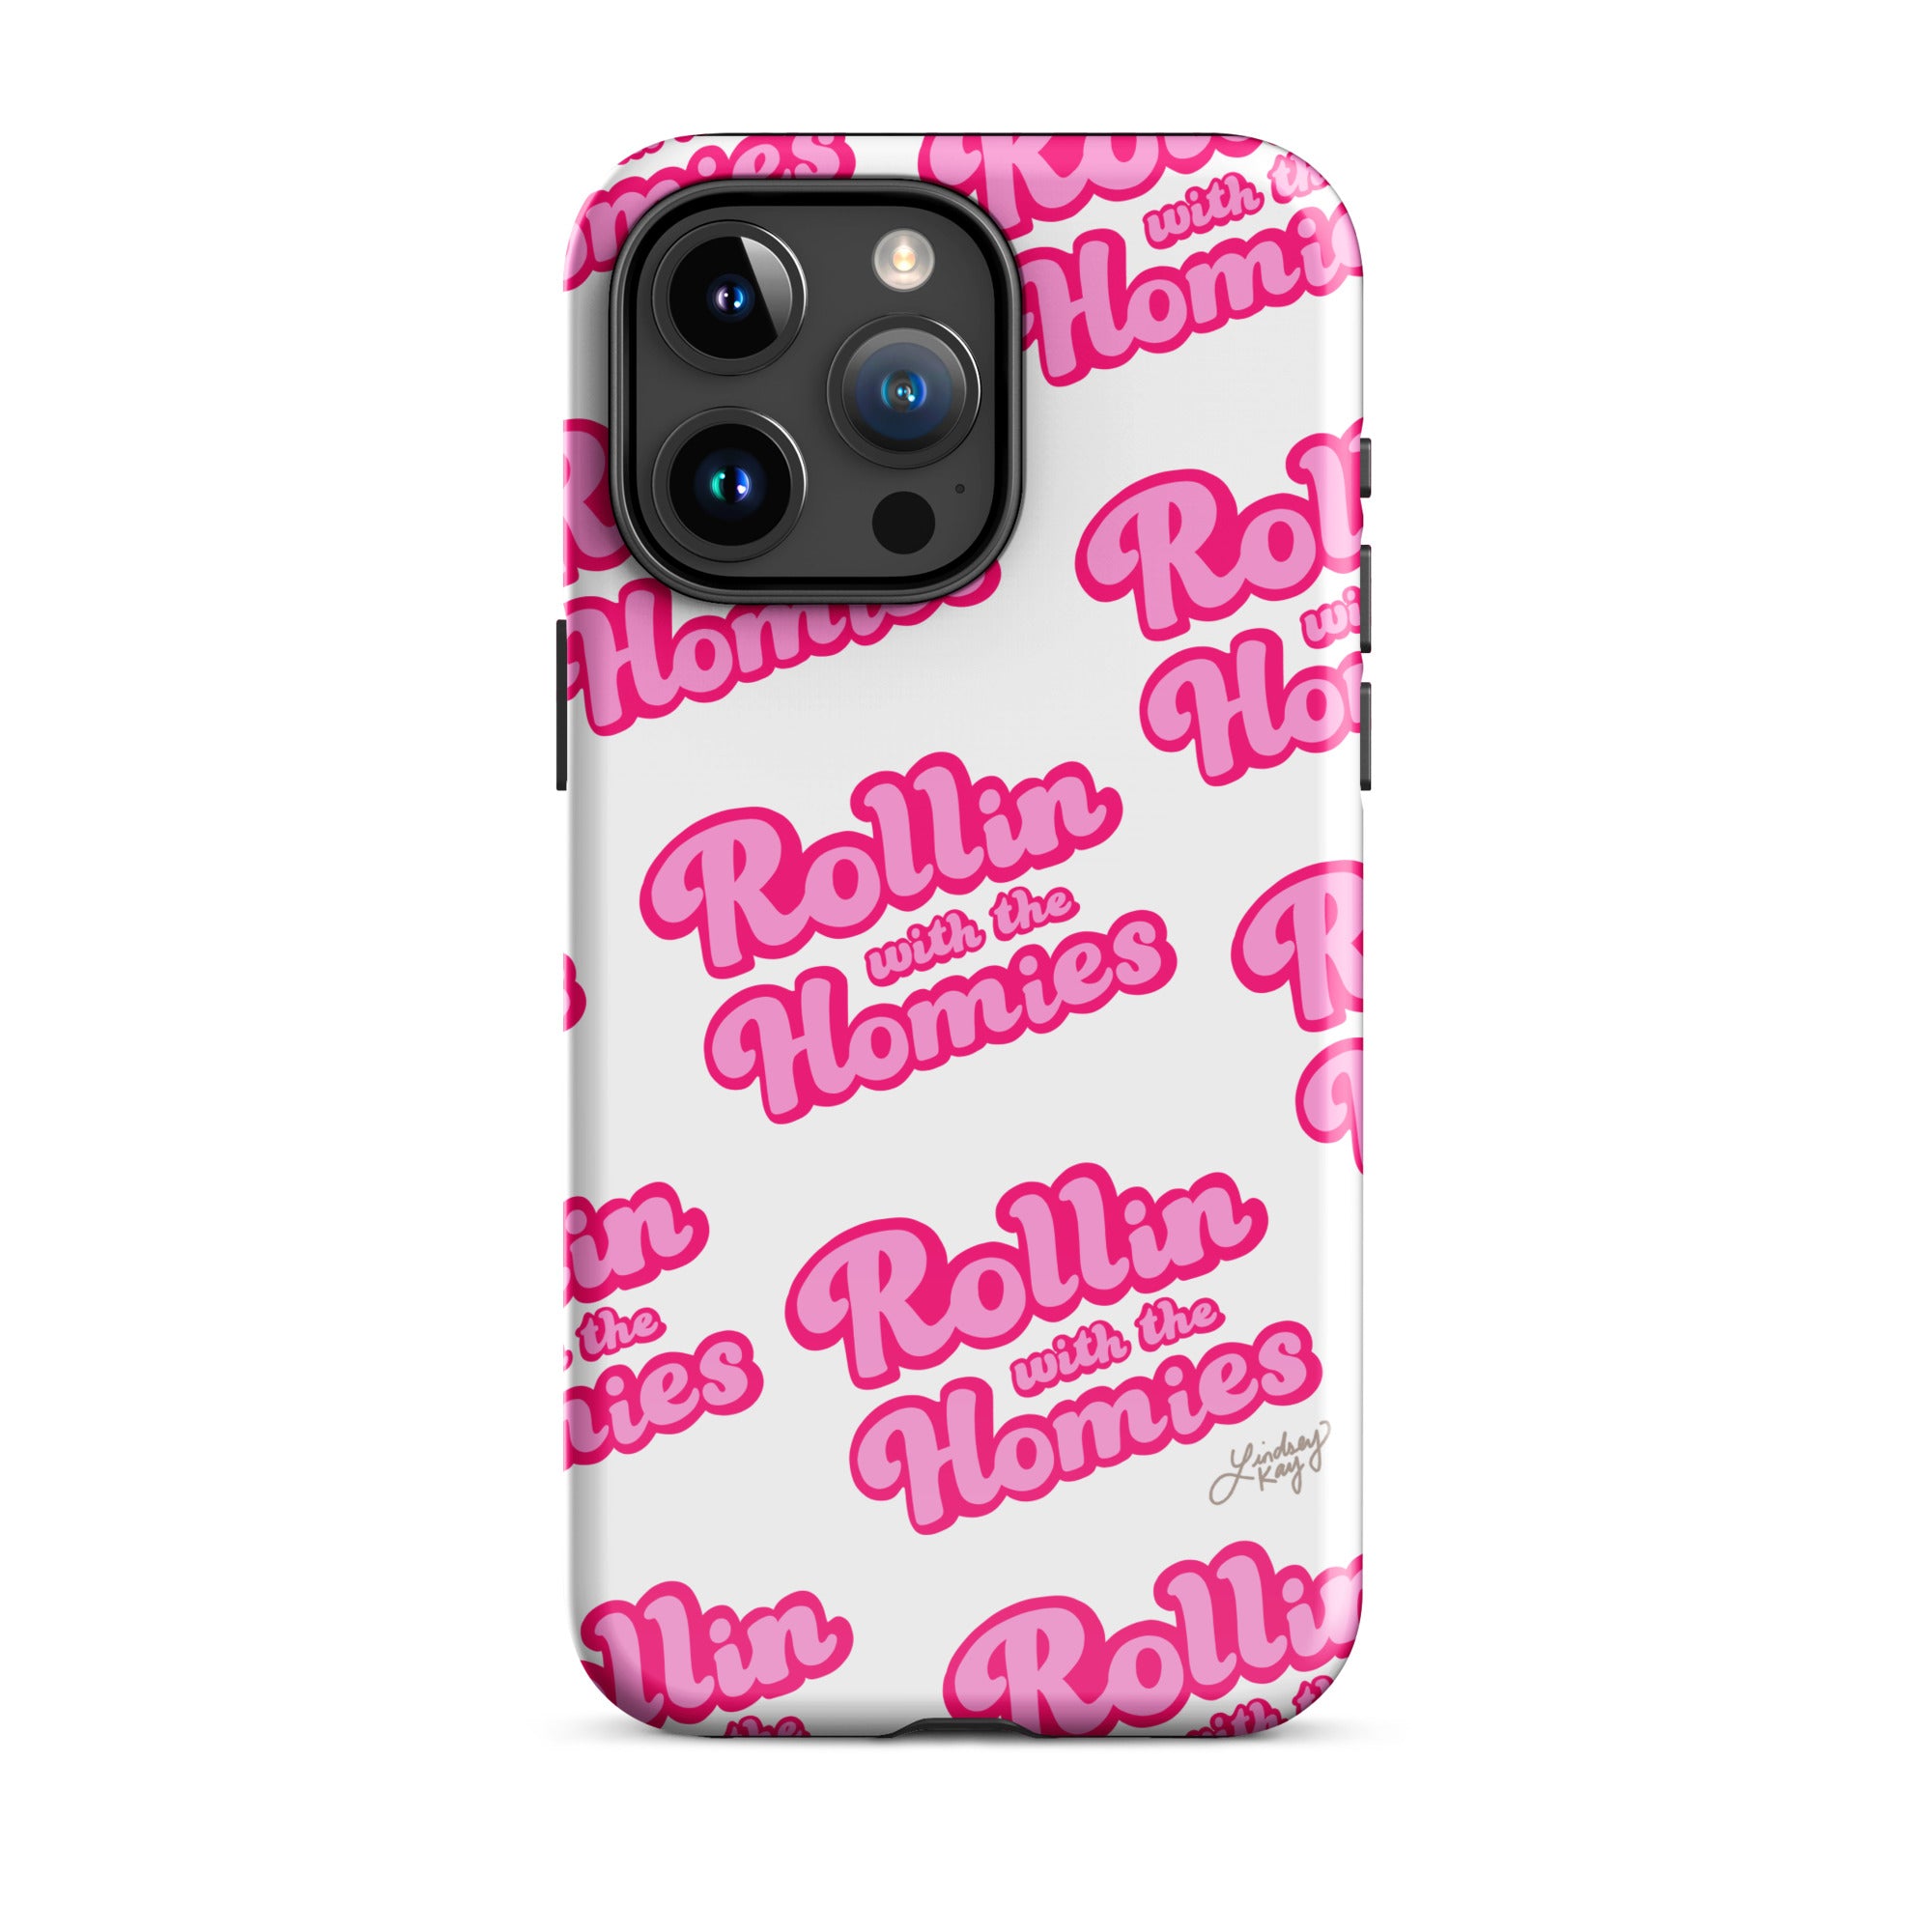 rollin with the homies movie clueless pink cute trendy funny iphone-15 iphone all sizes phone case cover durable lindsey kay collective